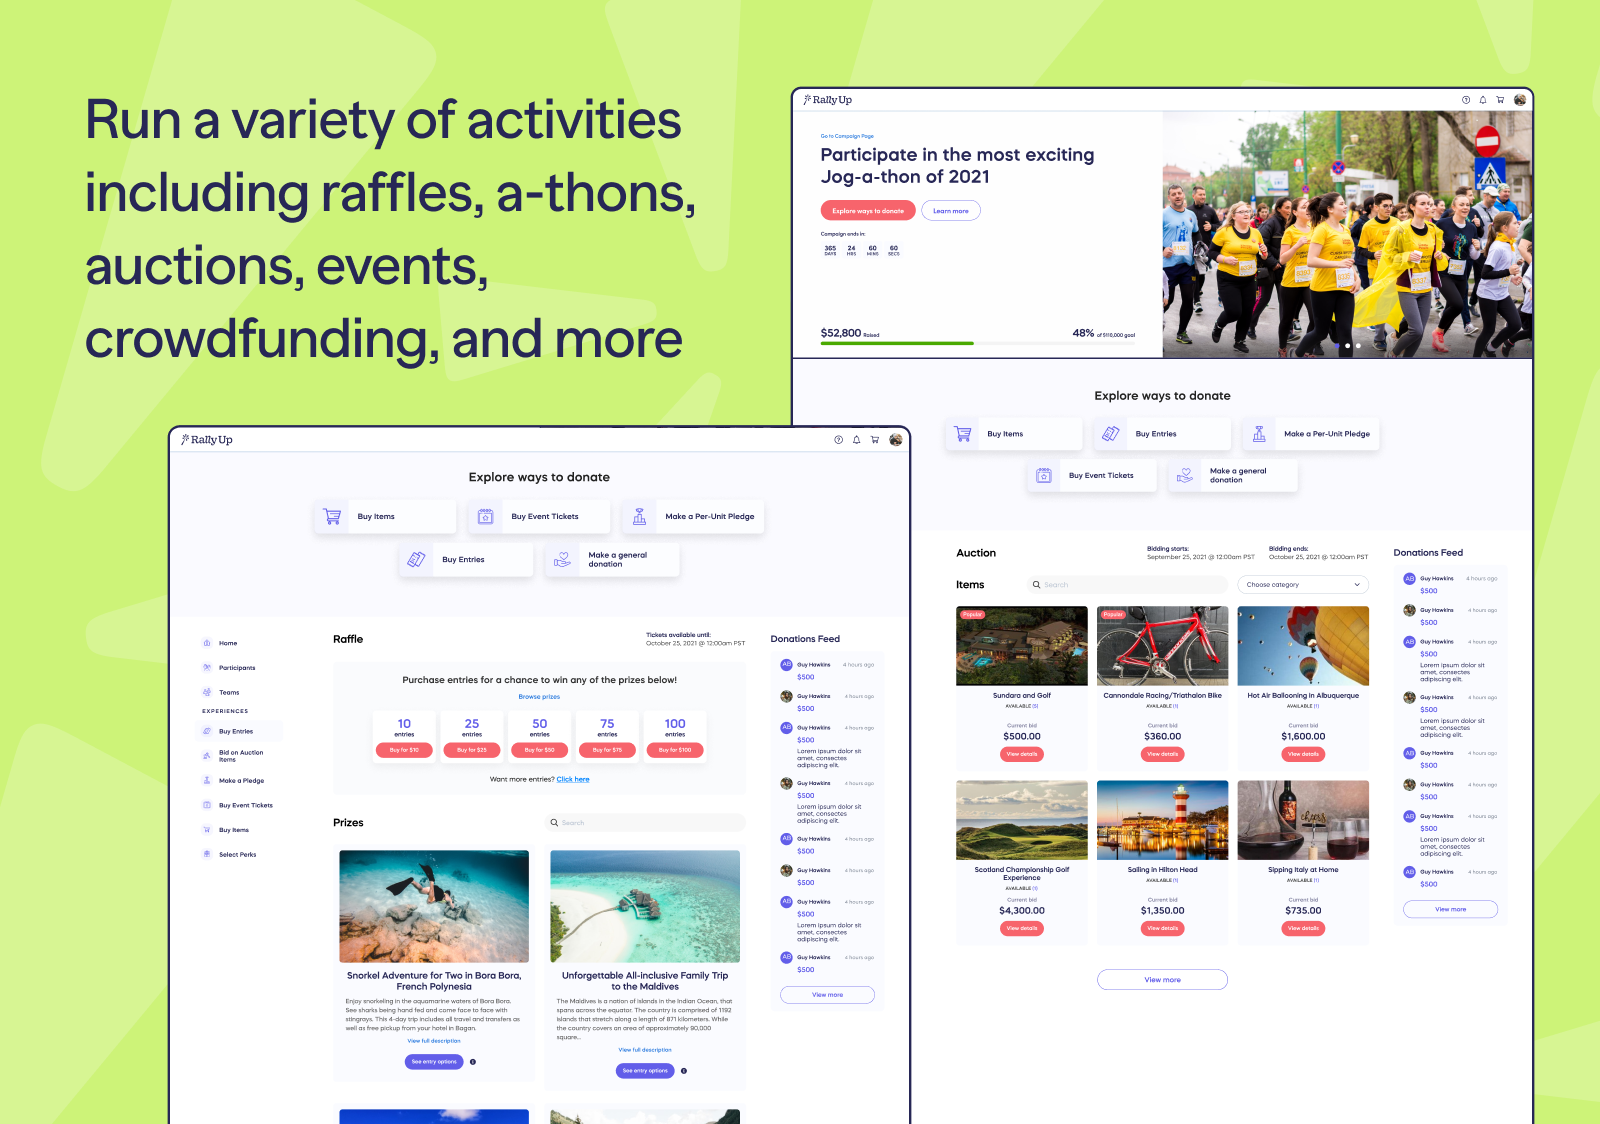 Run a variety of activities including raffles, a-thons, auctions, events, crowdfunding, and more